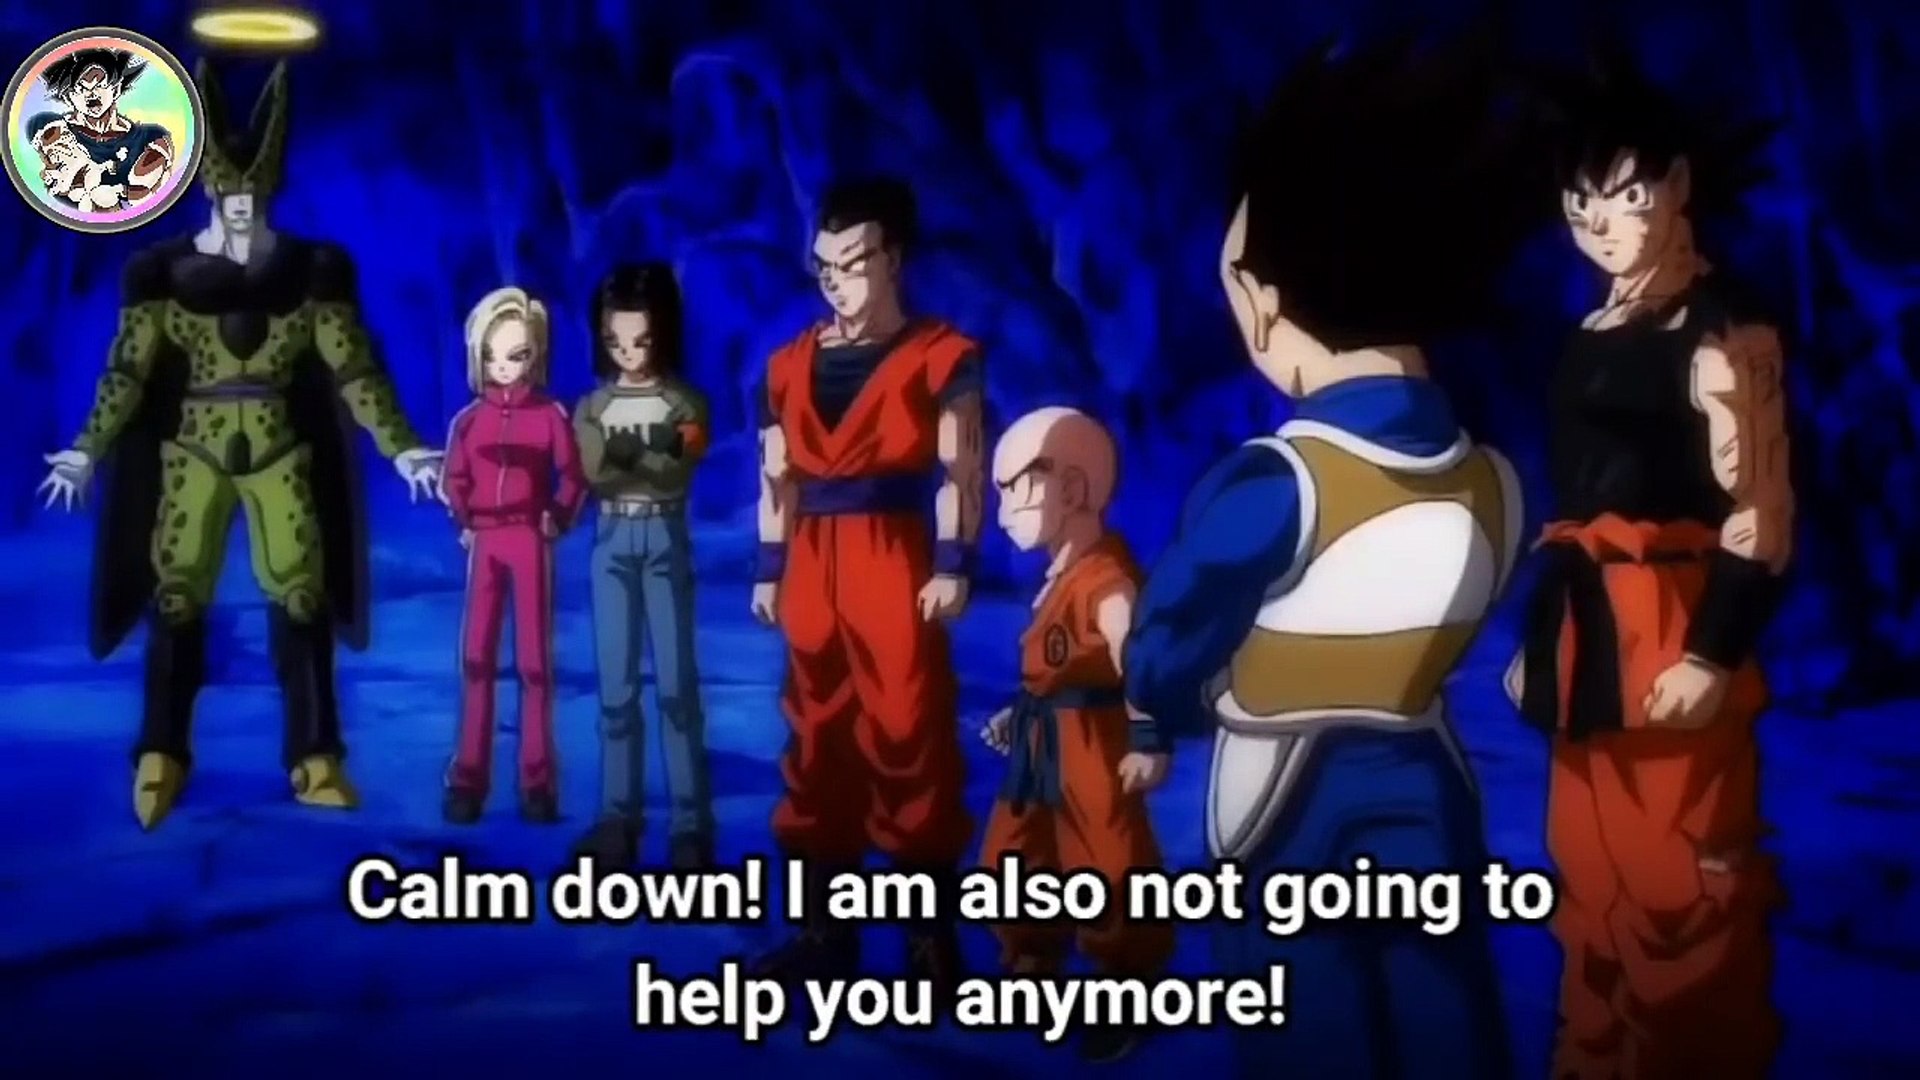 Super Dragon Ball Heroes Full Episode 44 English Subbed HD!!! 